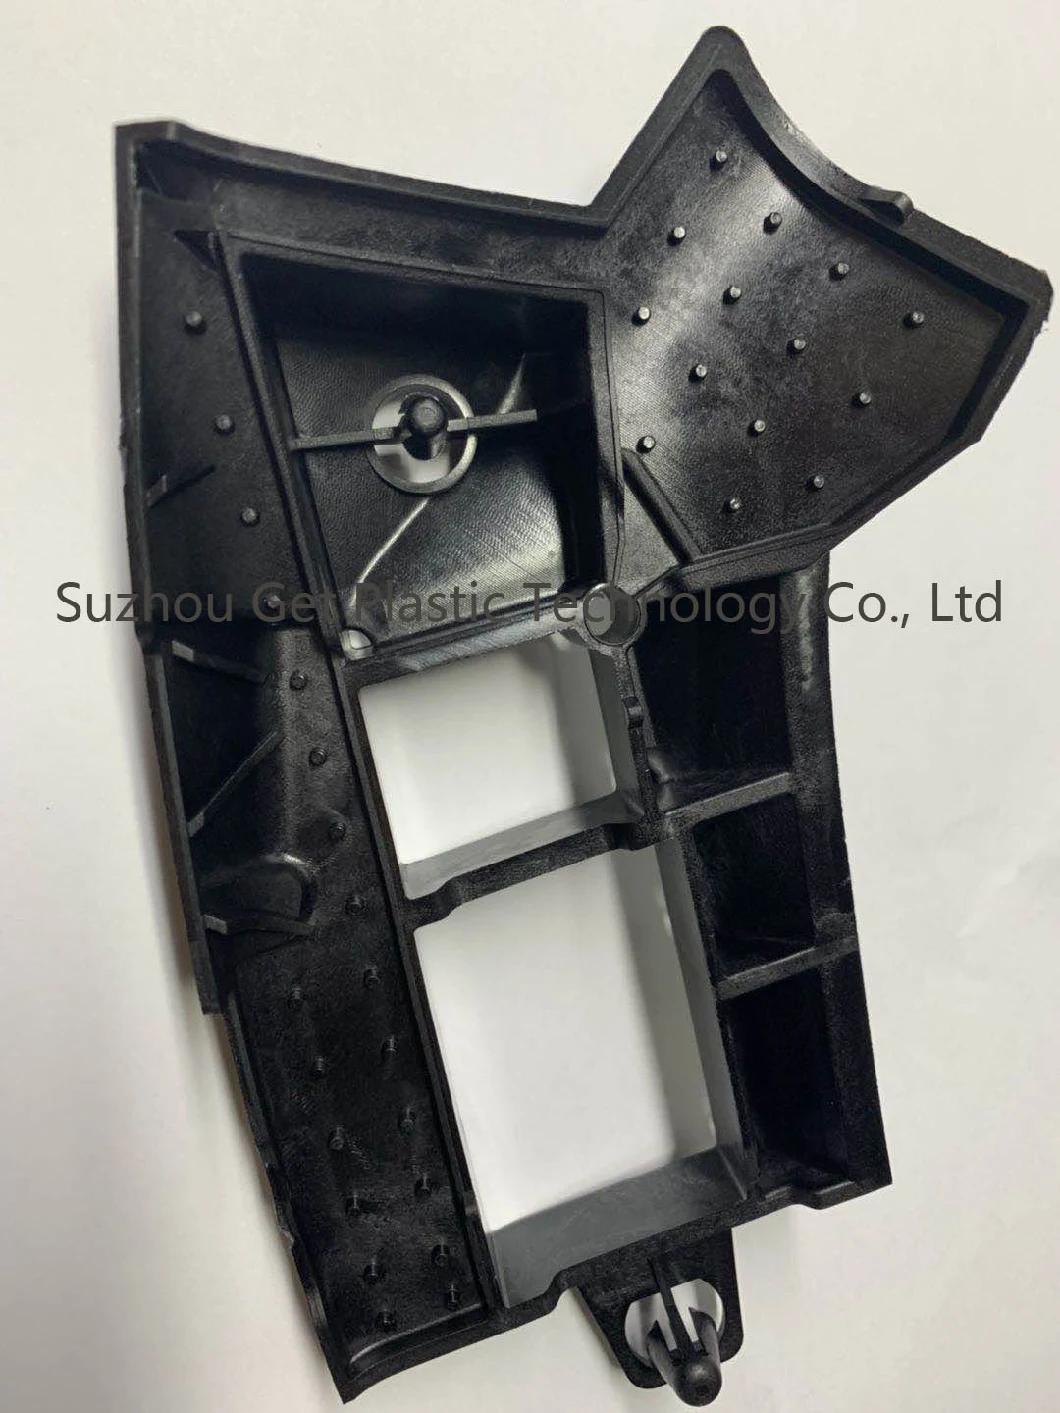 Hight Quality Cutomized Injection Moulding Plastic Parts